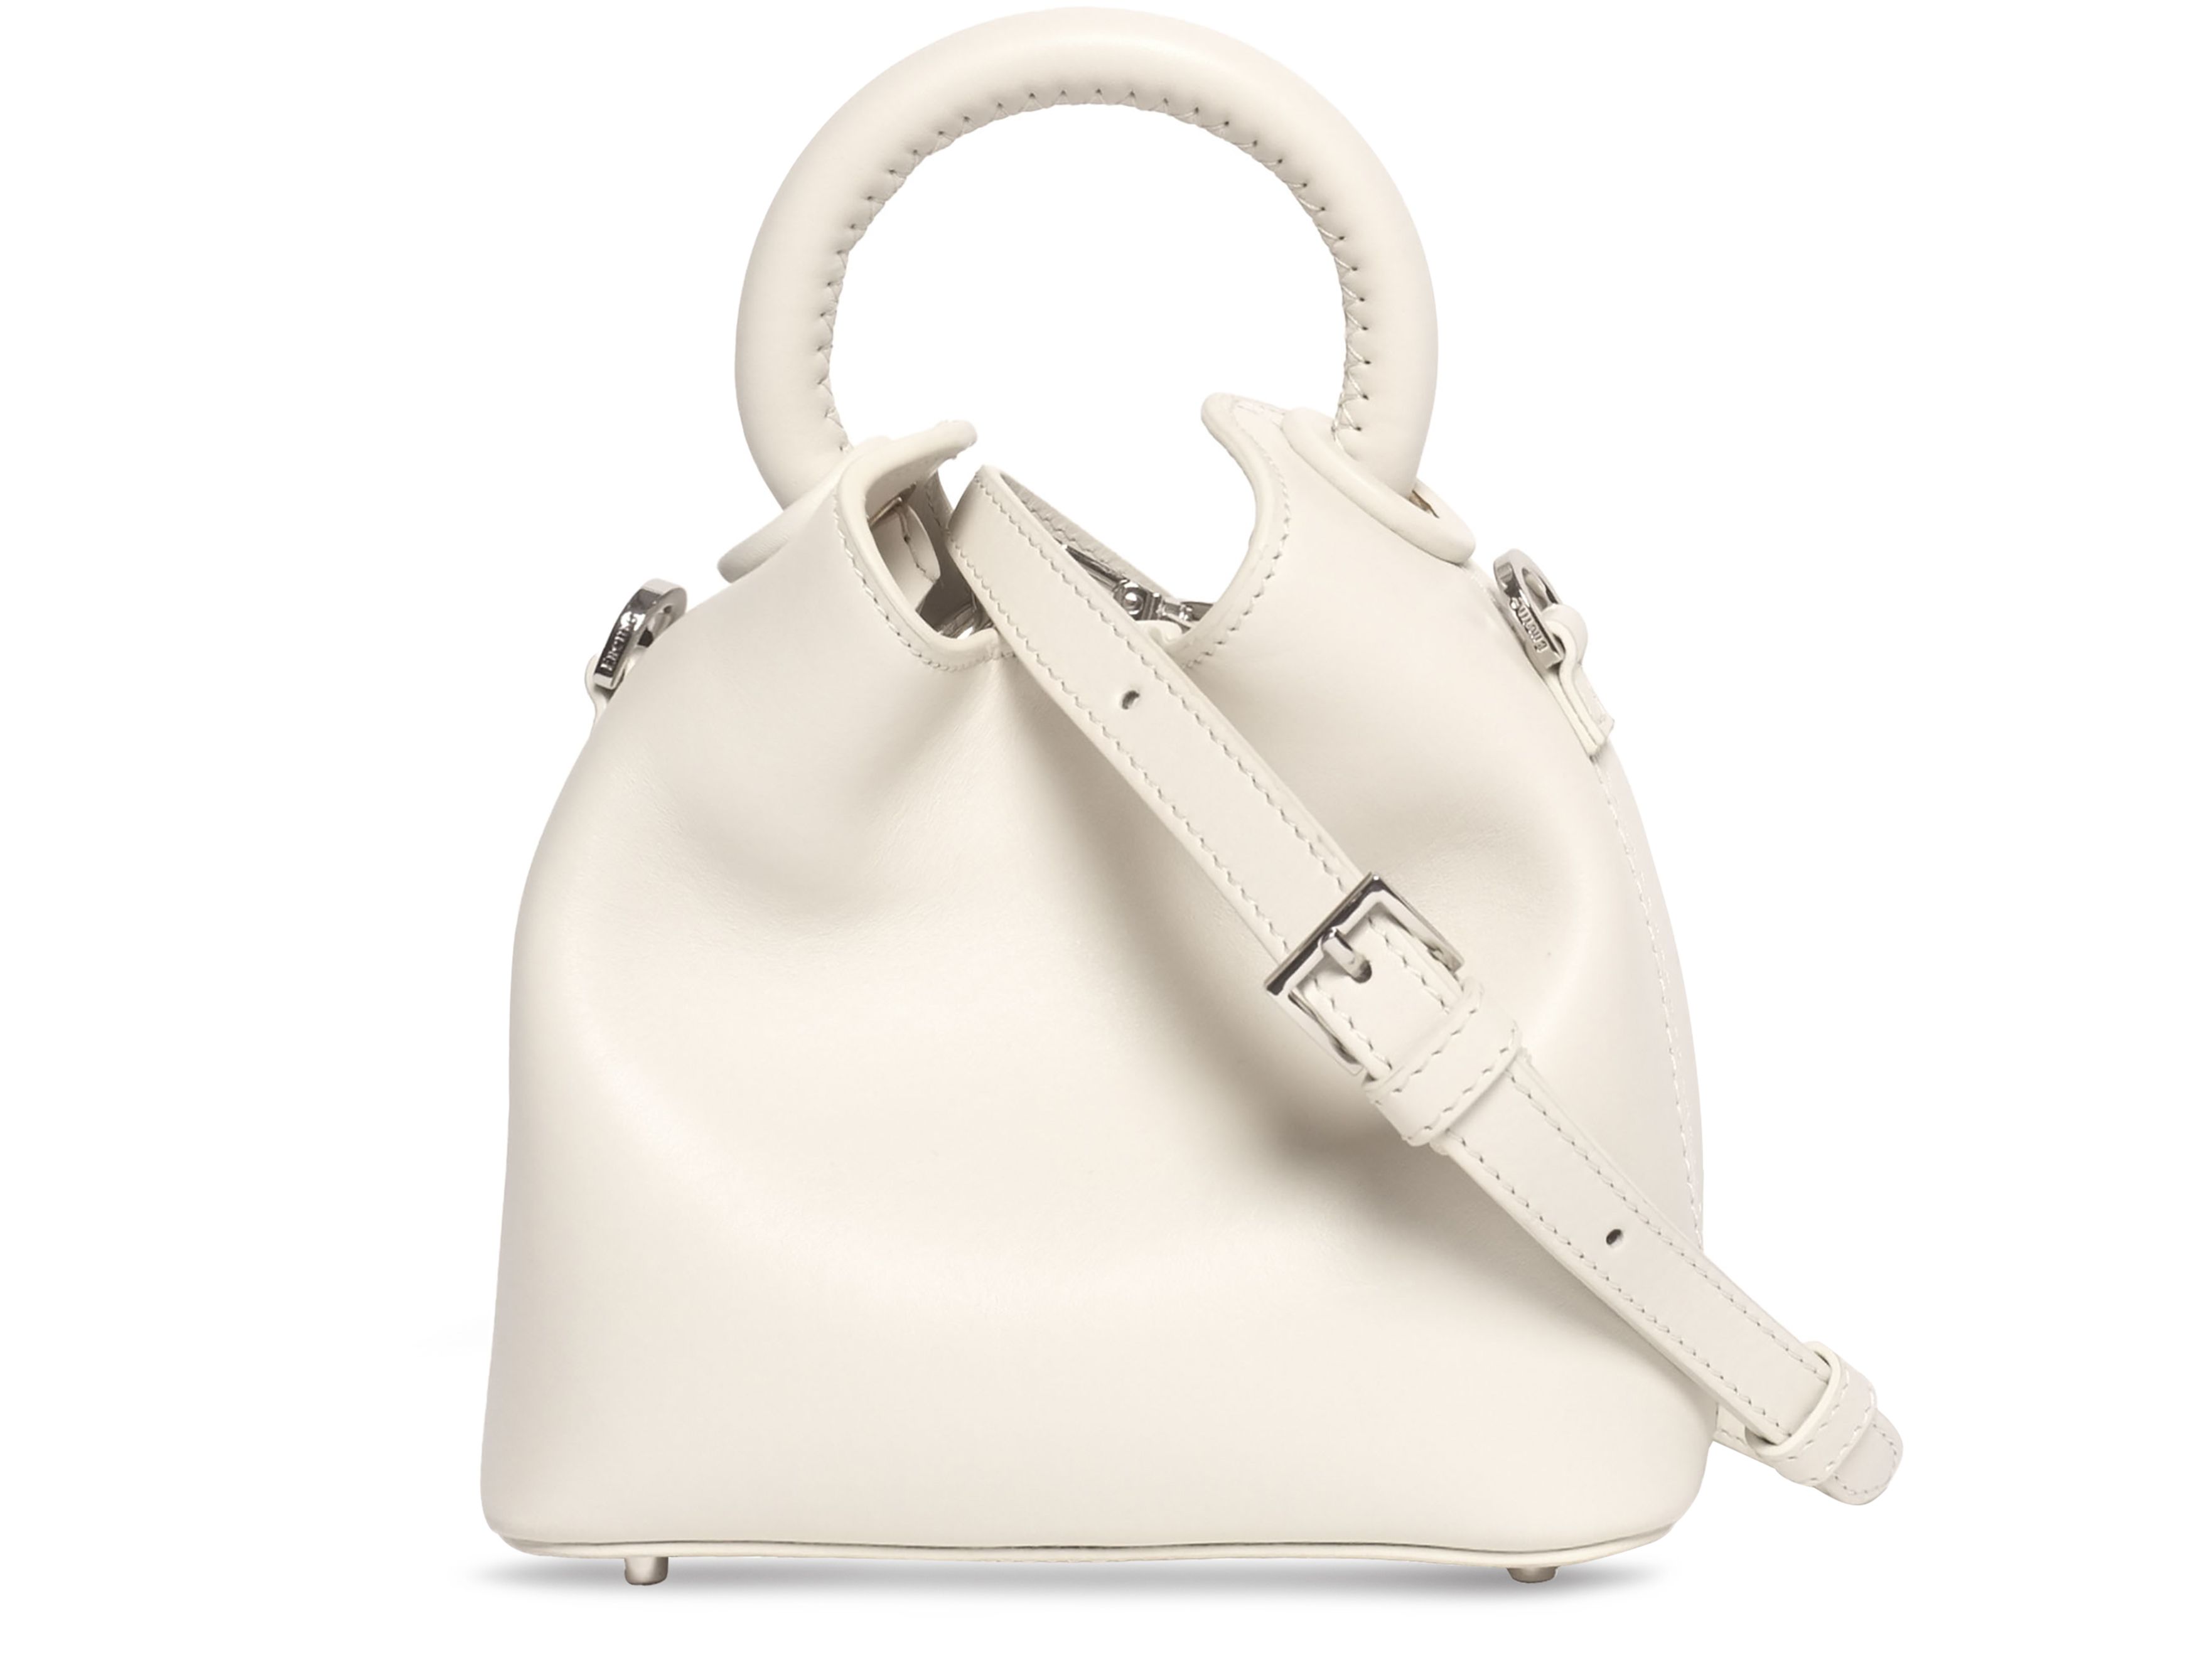 Elleme Madeleine small leather bag with silver hardware